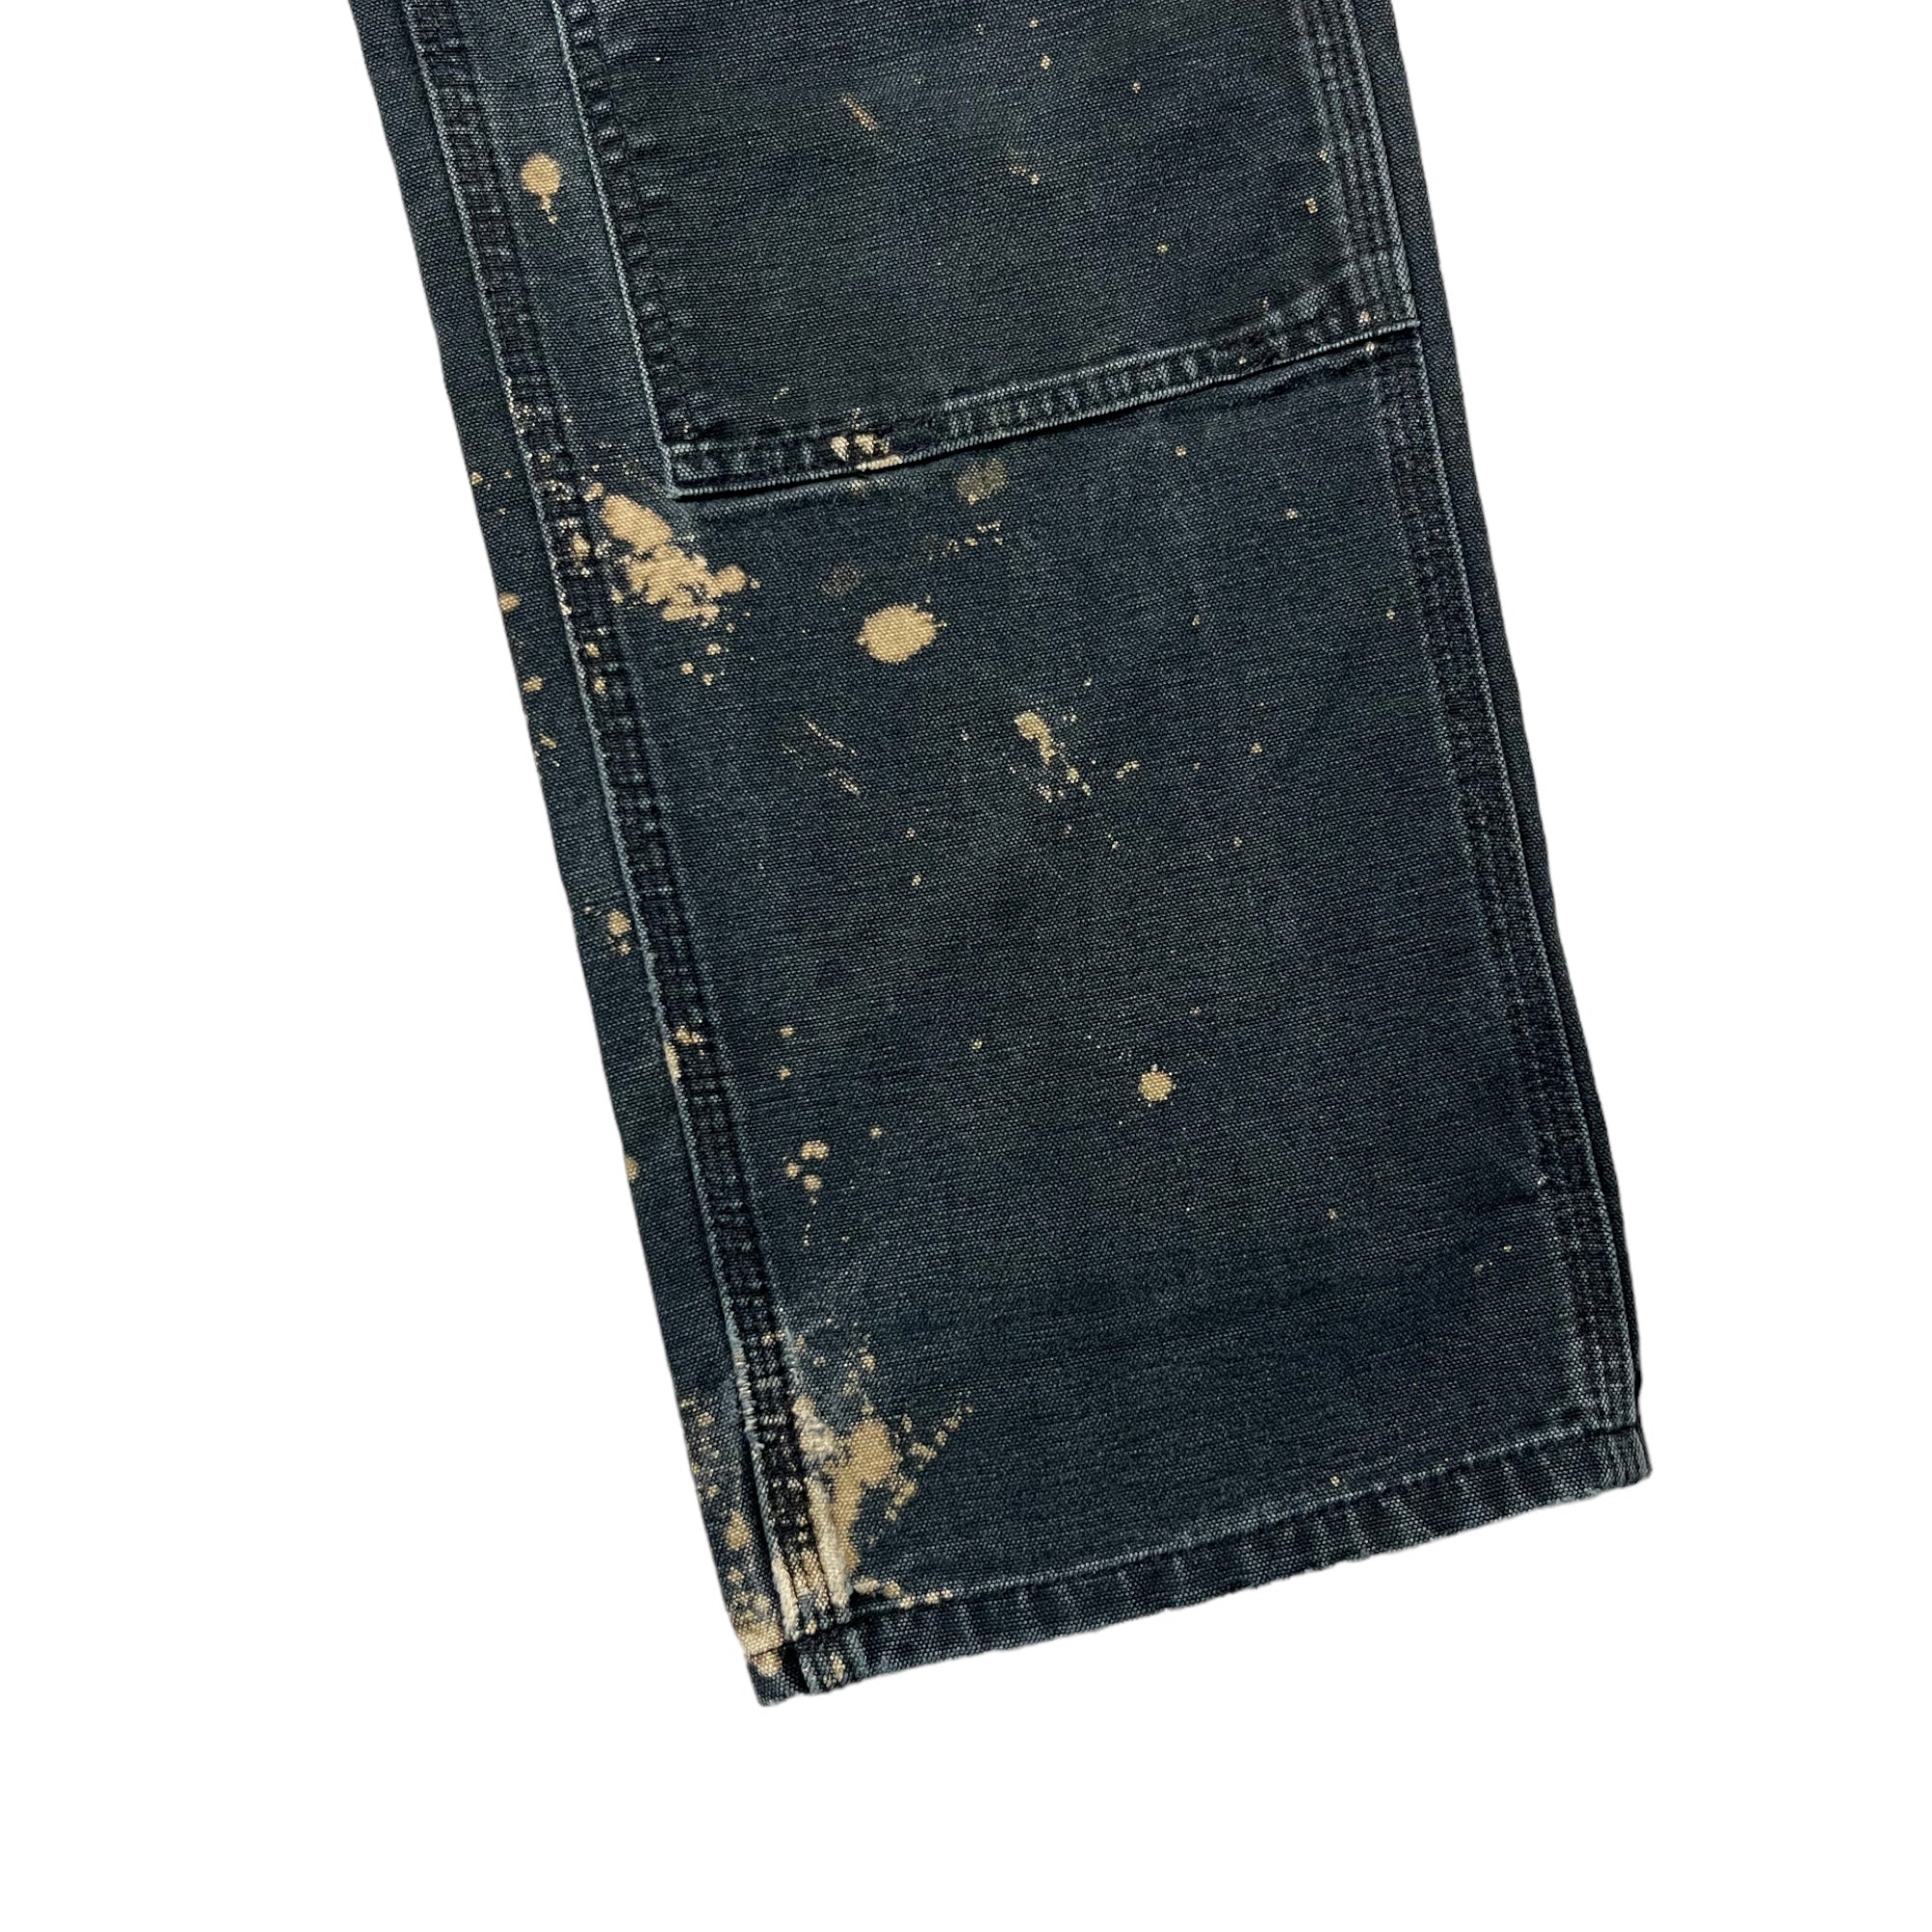 1980s Carhartt Double Knees With Distressing and Bleach Marks - Faded Black - 30x31